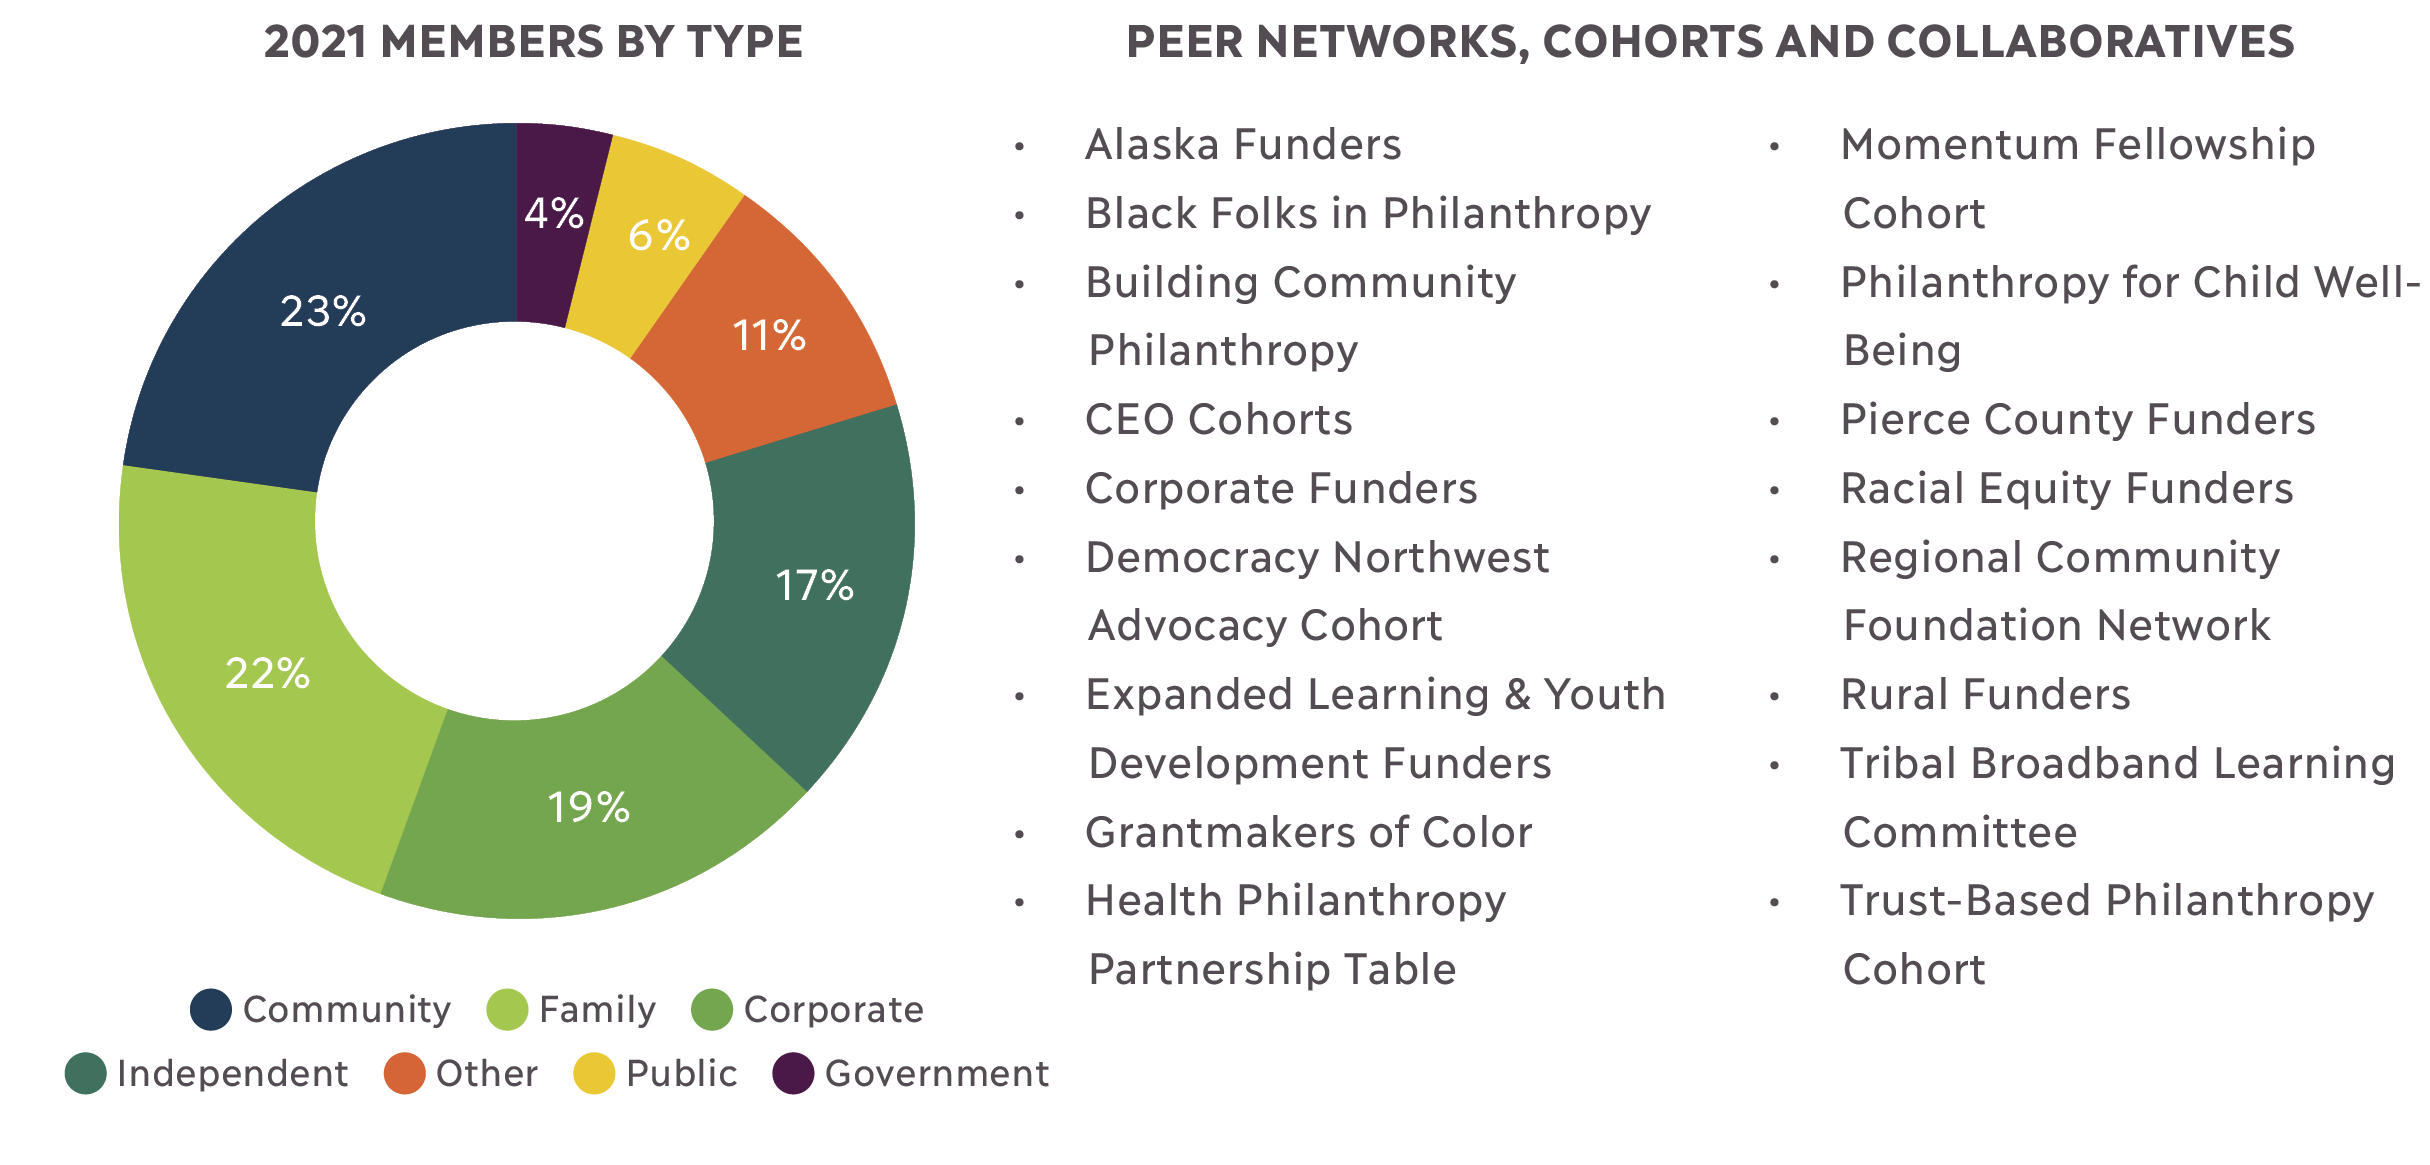 This image shows a graph of 2021 members by org. type + a list of peer networks & groups. Graph: Community 23%; Family 22%; Corporate 19%; Independent 17%; Other 11%; Public 6%; Government 4%. Peer groups - see https://philanthropynw.org/networks-connect